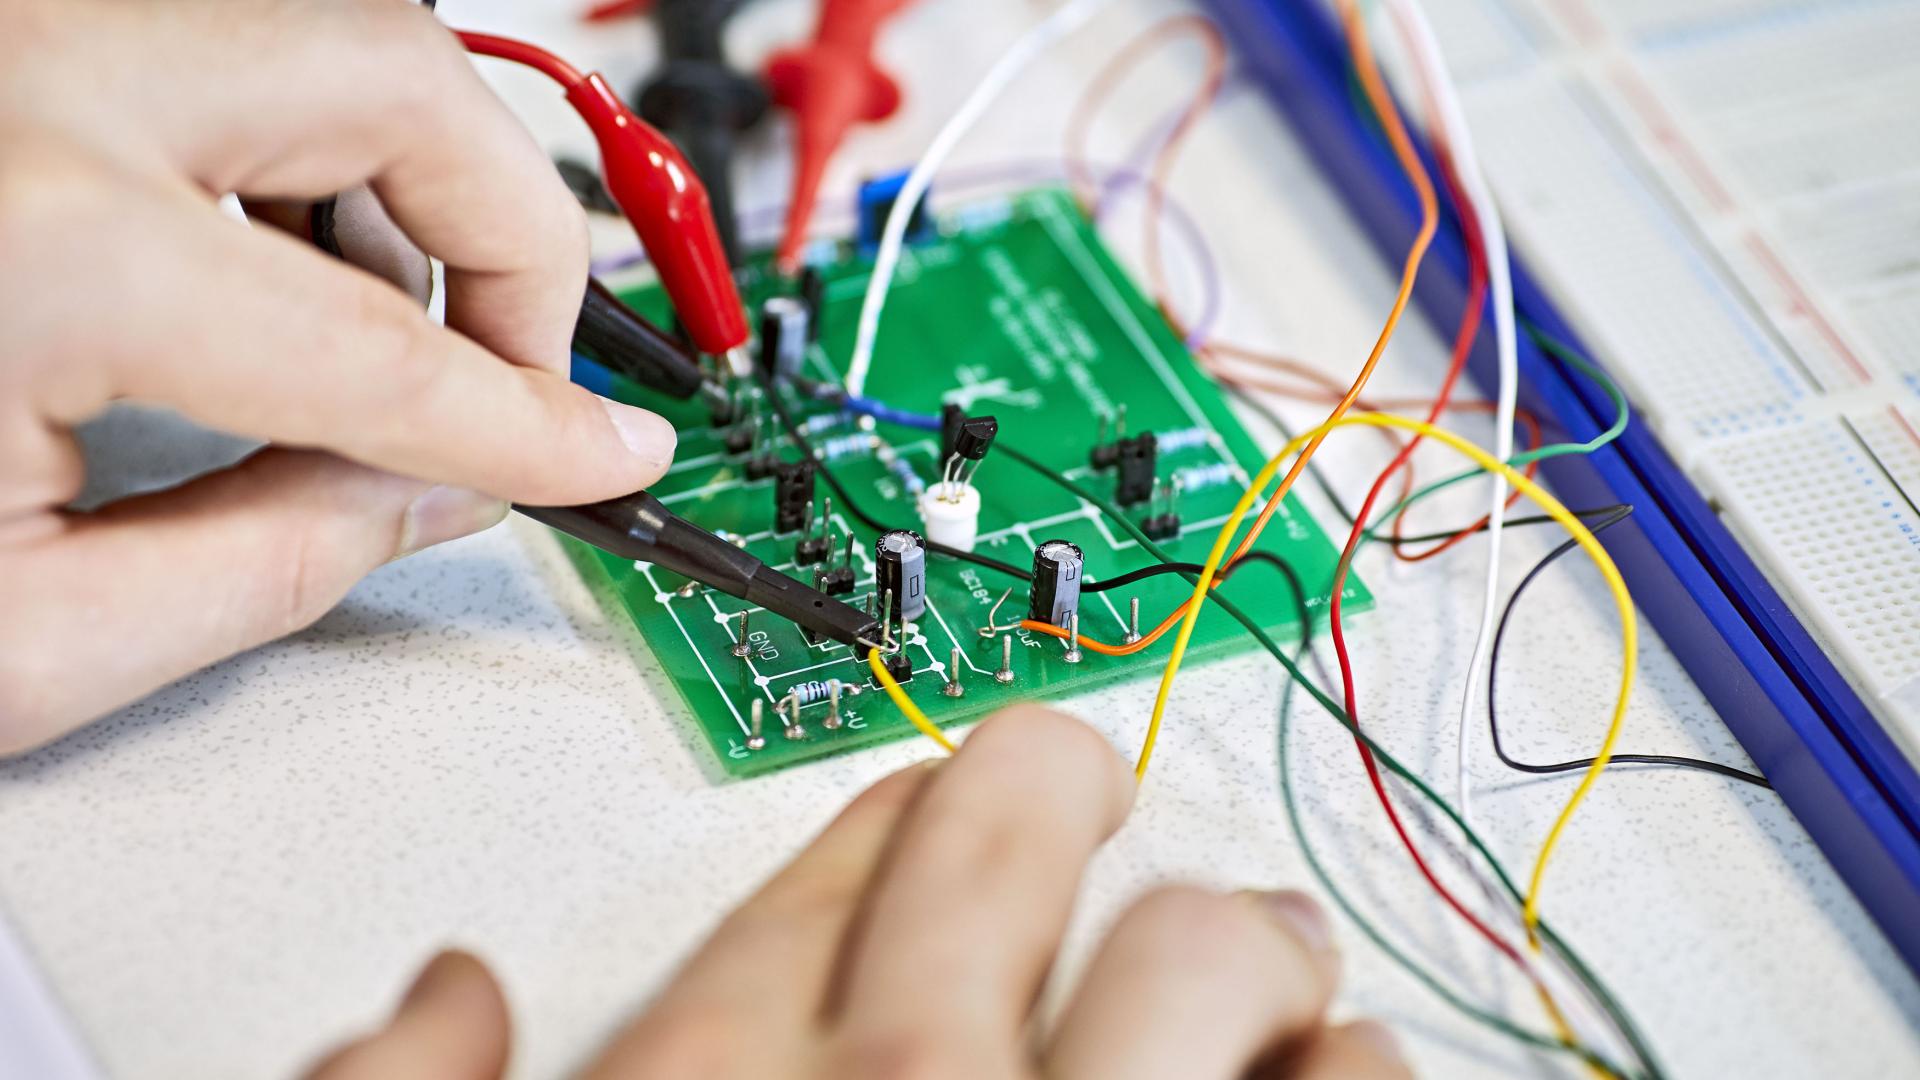 Close-up of a person working on a electrical circuit